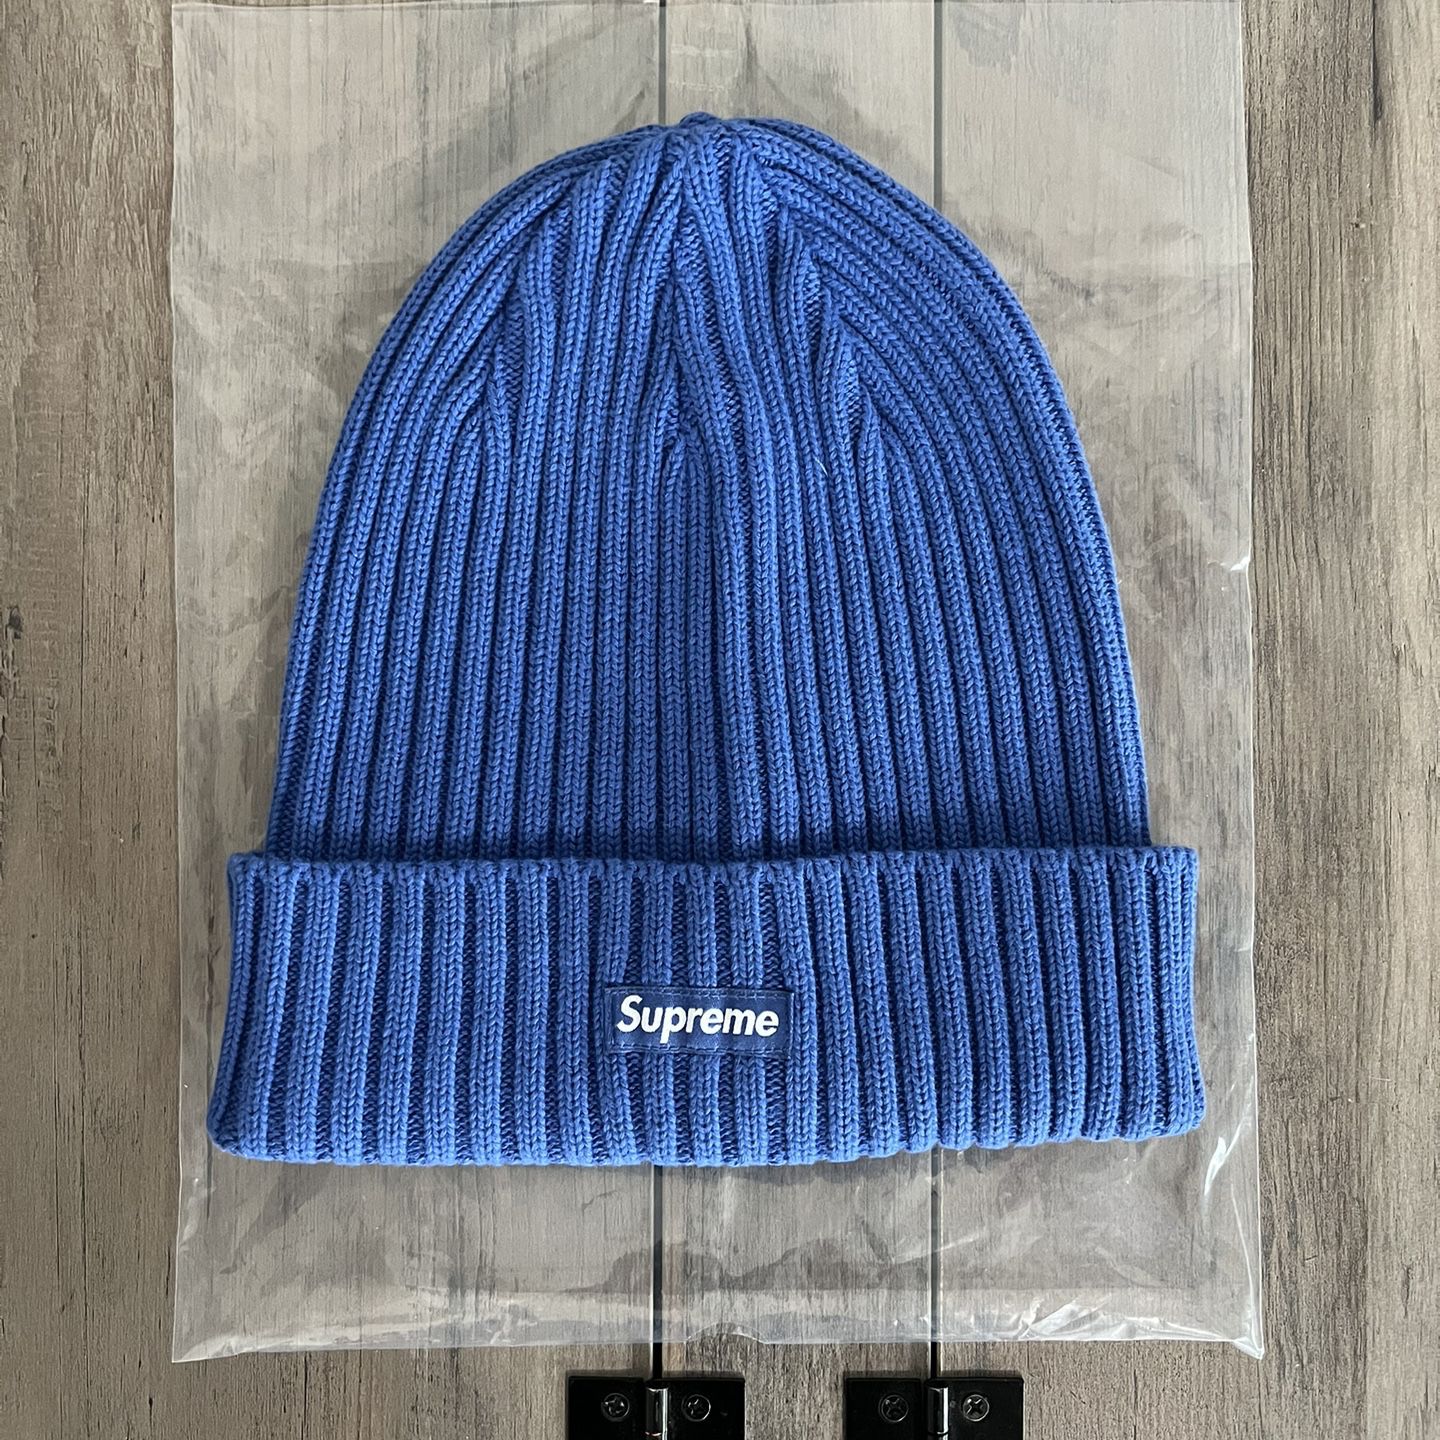 Supreme   Overdyed Beanie for Sale in El Cajon, CA   OfferUp